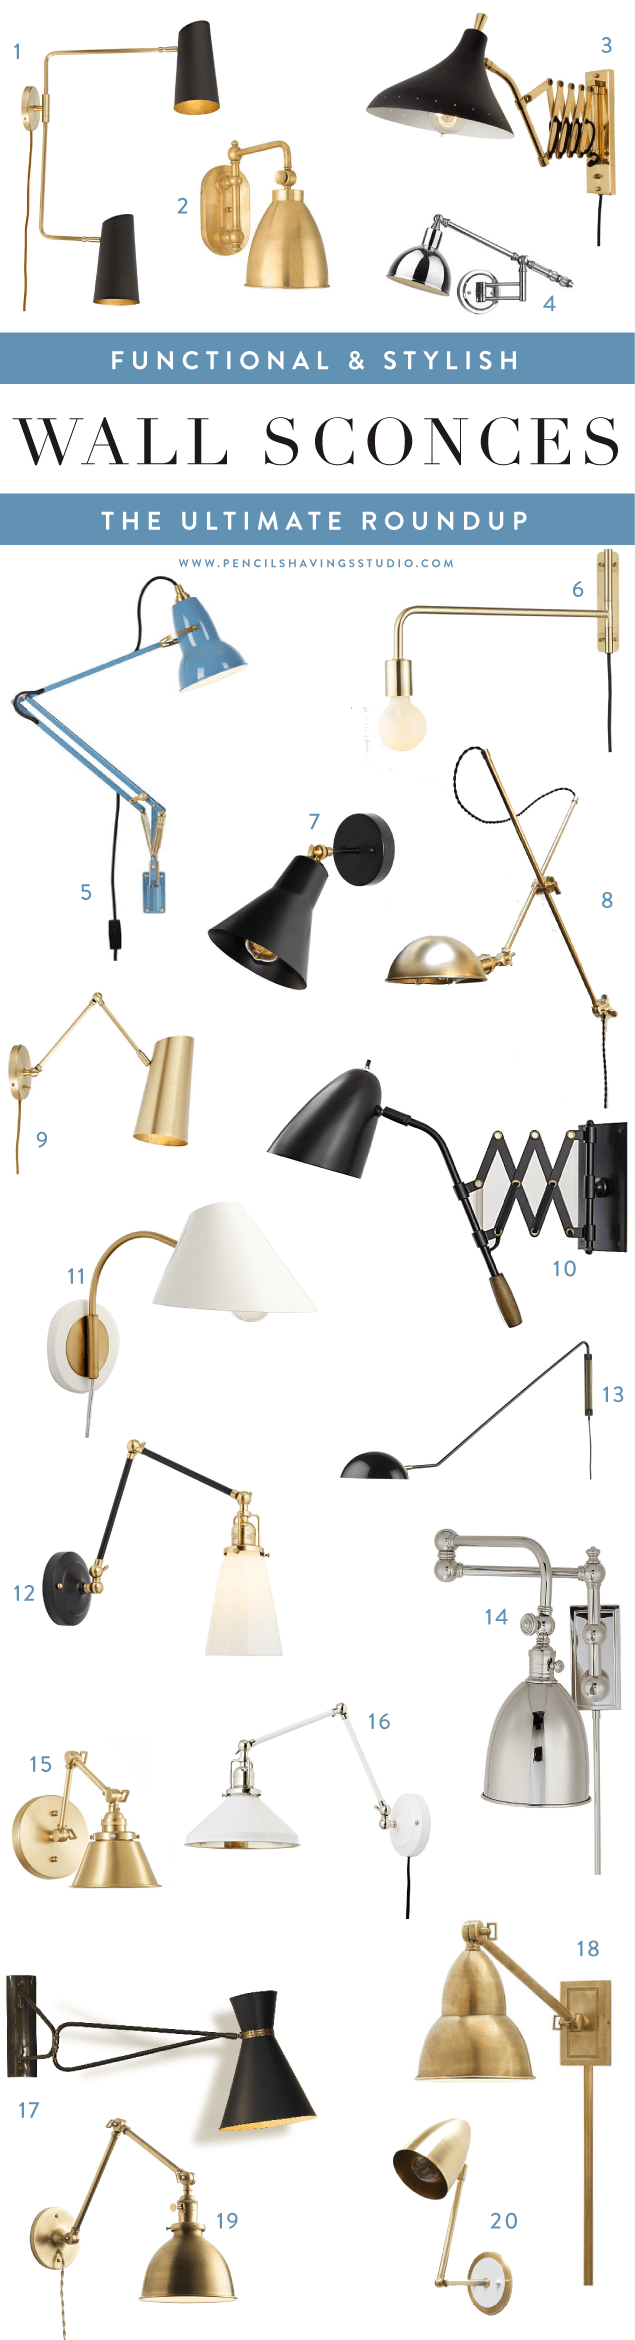 The best in articulating wall sconces, swing arm wall sconces, adjustable wall sconces and more - a roundup of all my favorite sconces in a variety of finishes including brass sconces, black sconces, industrial sconces and more. www.pencilshavingsstudio.com